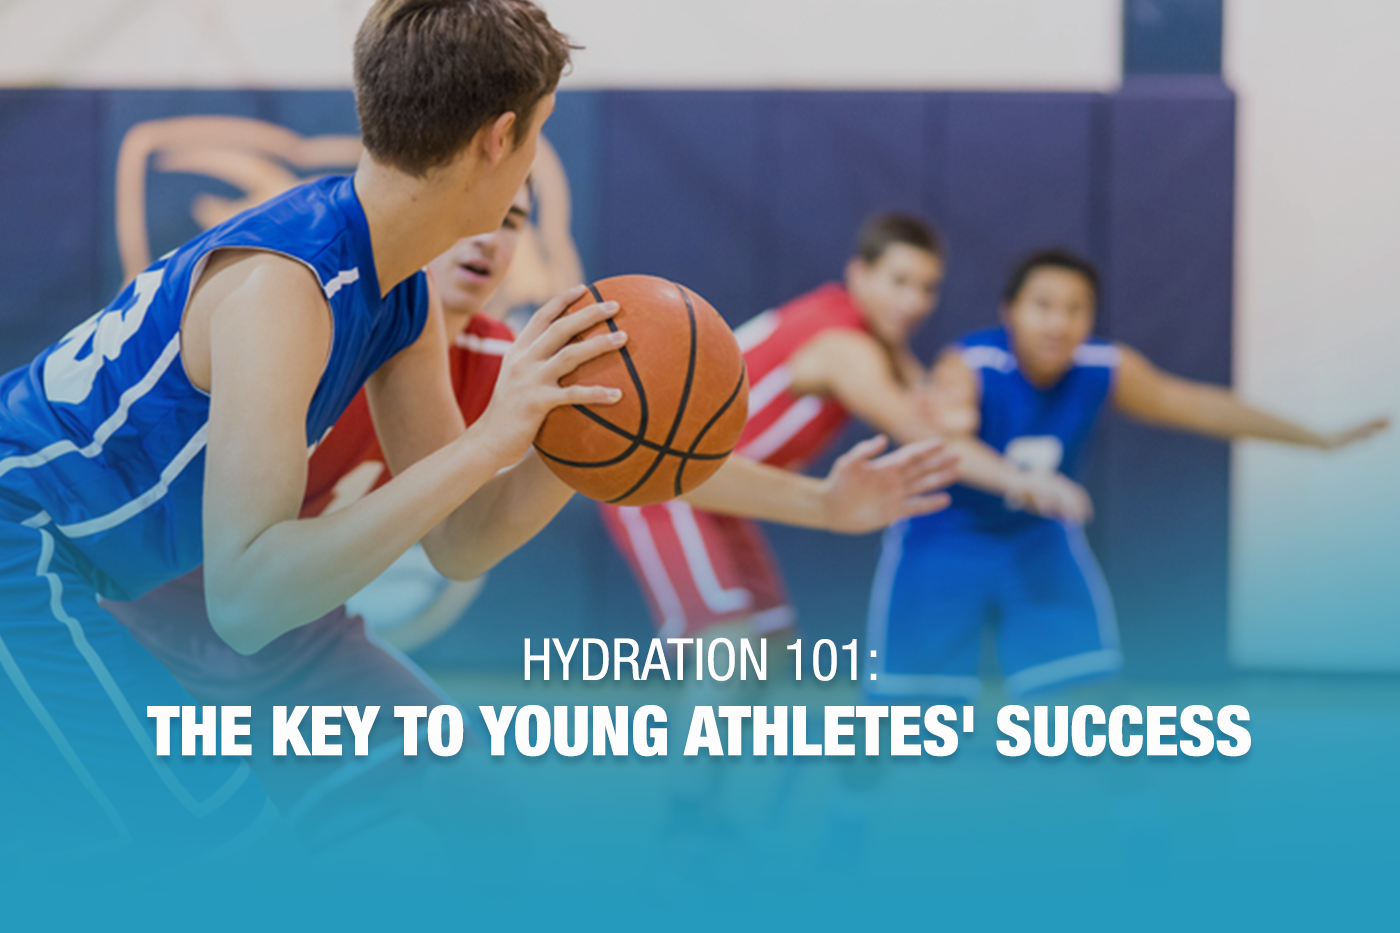 Hydration 101: The Key to Young Athletes' Success